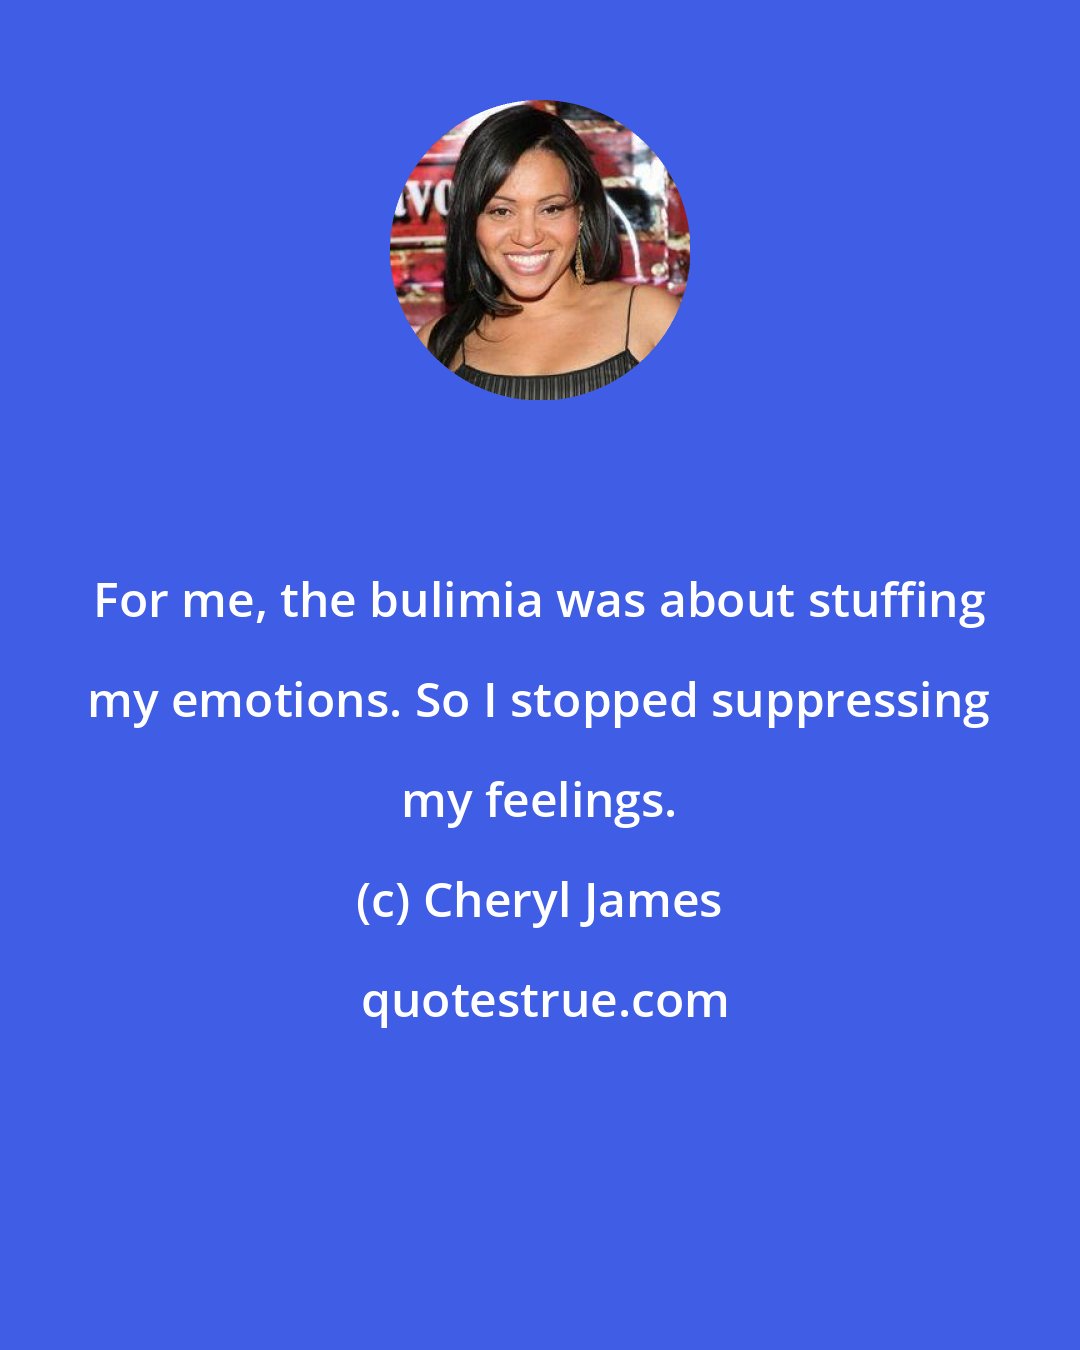 Cheryl James: For me, the bulimia was about stuffing my emotions. So I stopped suppressing my feelings.